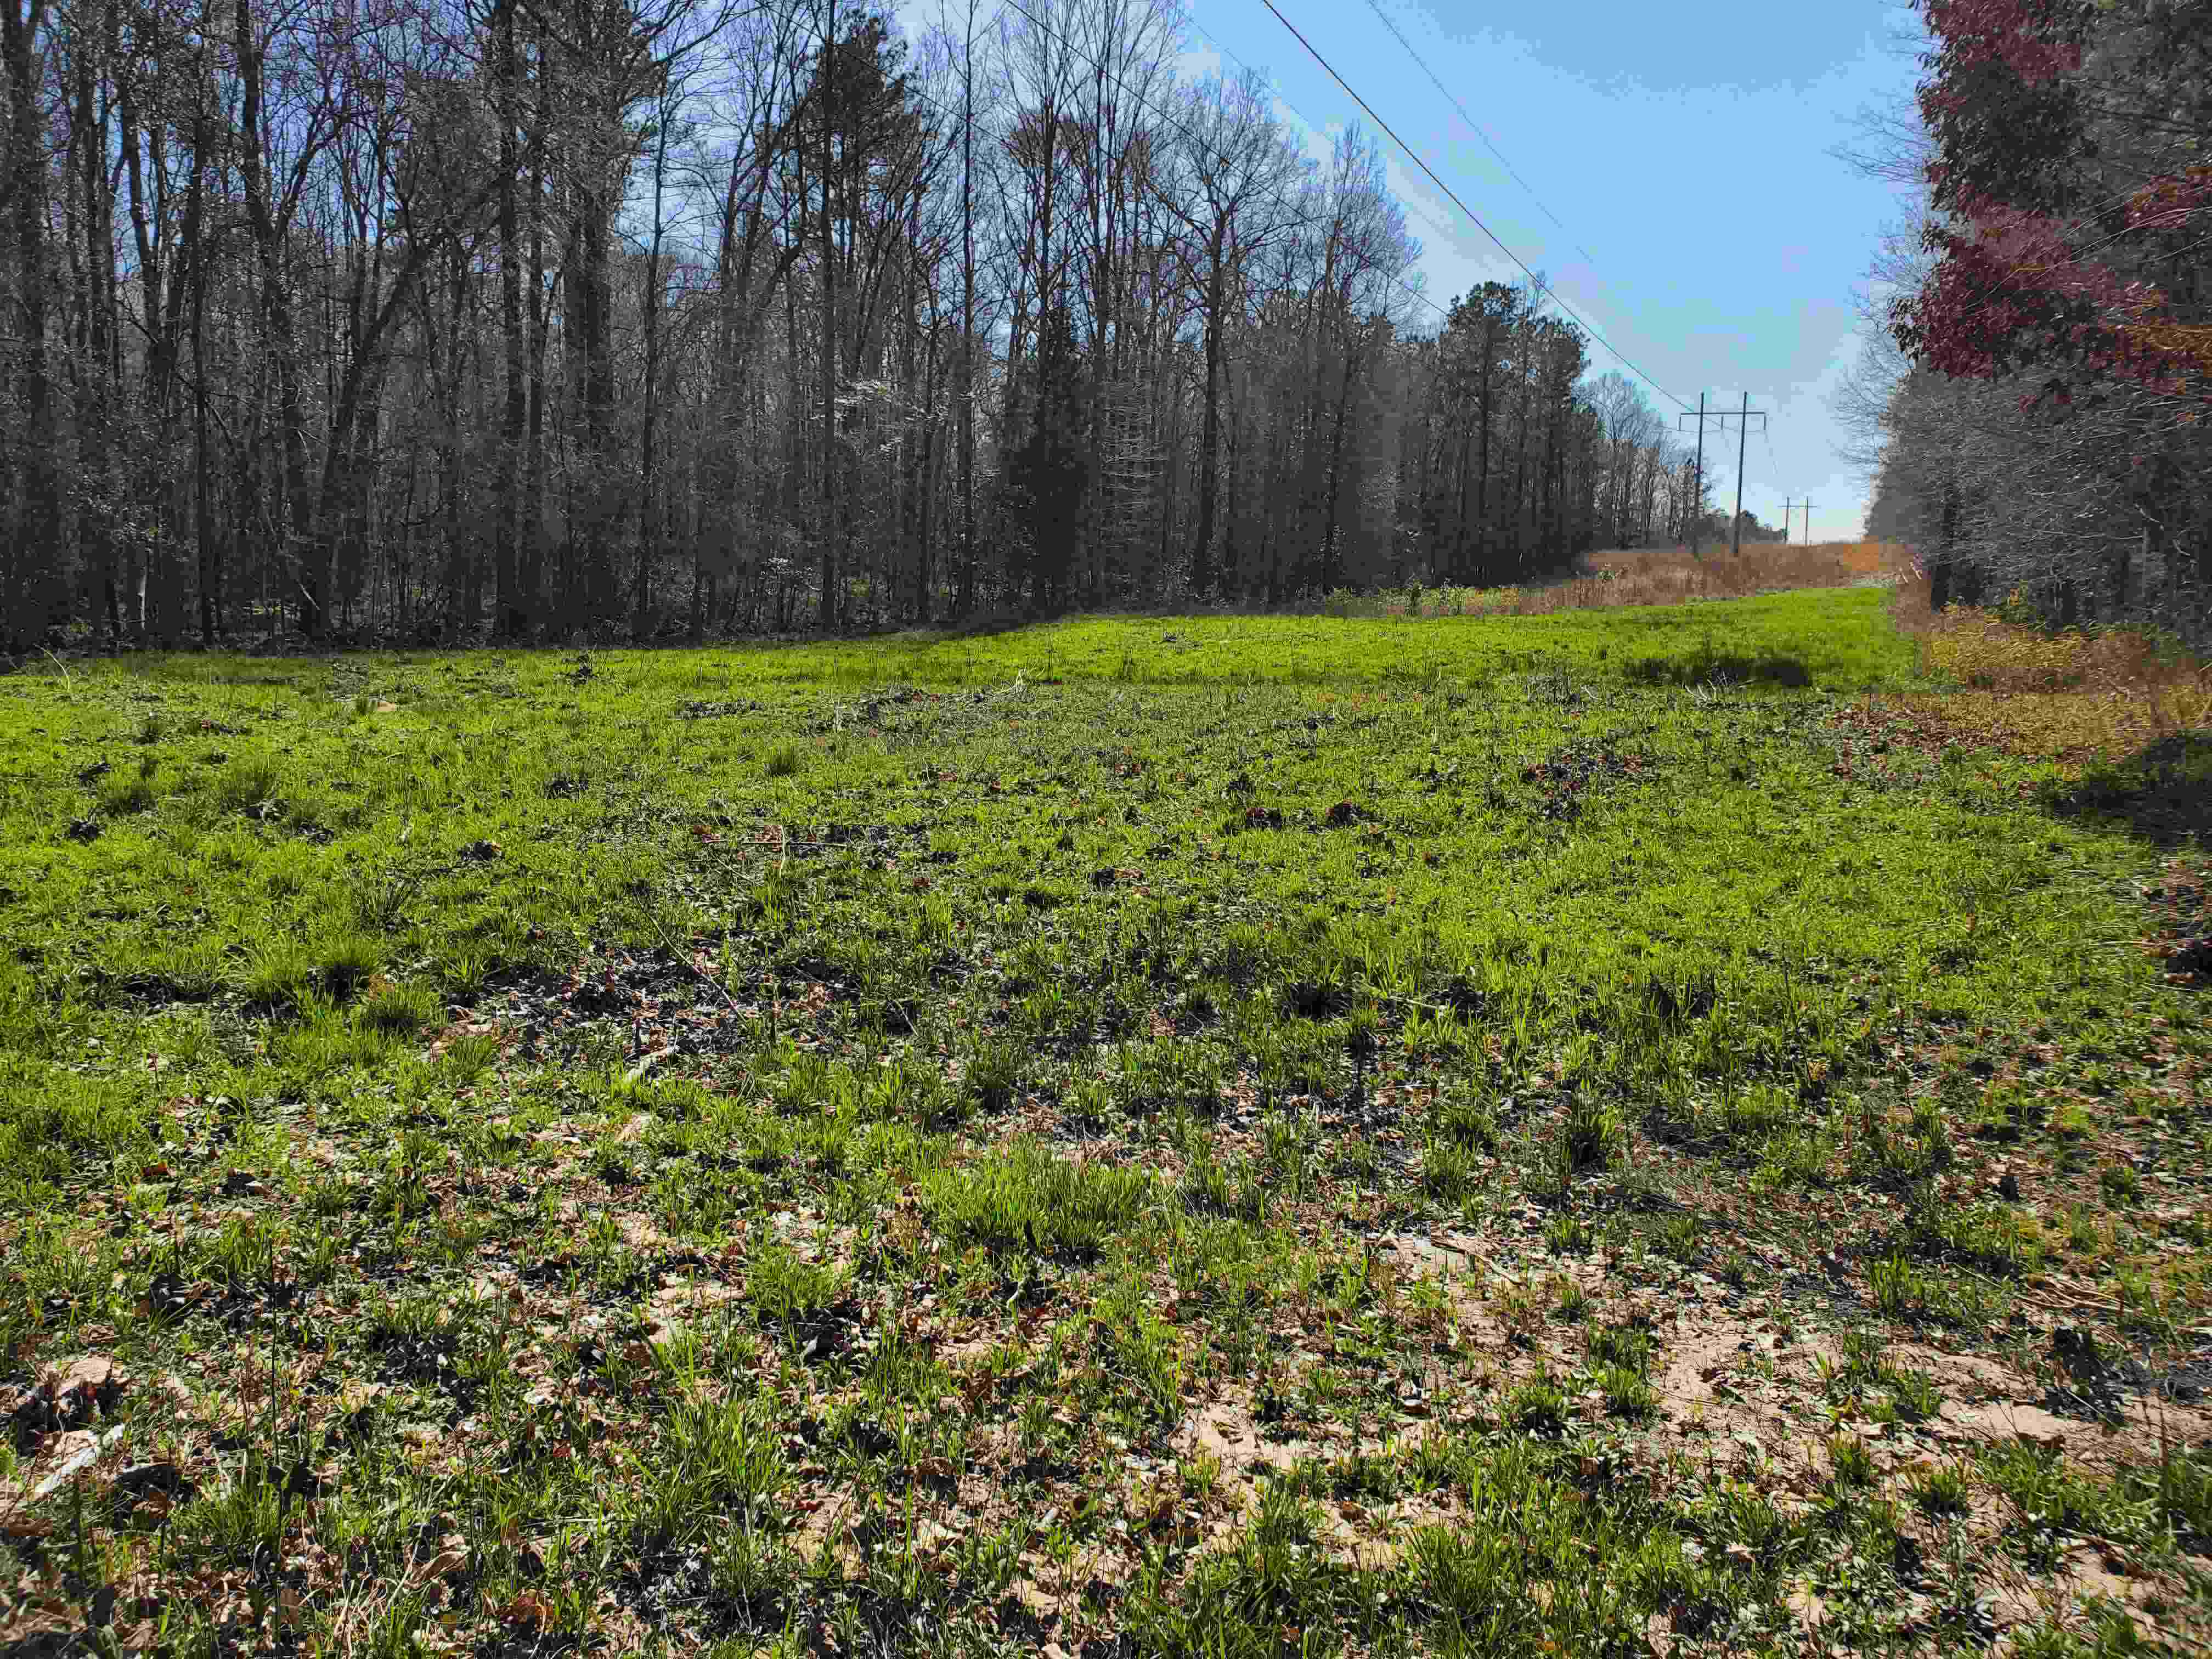 Another view of the wildlife food plot under the powerline